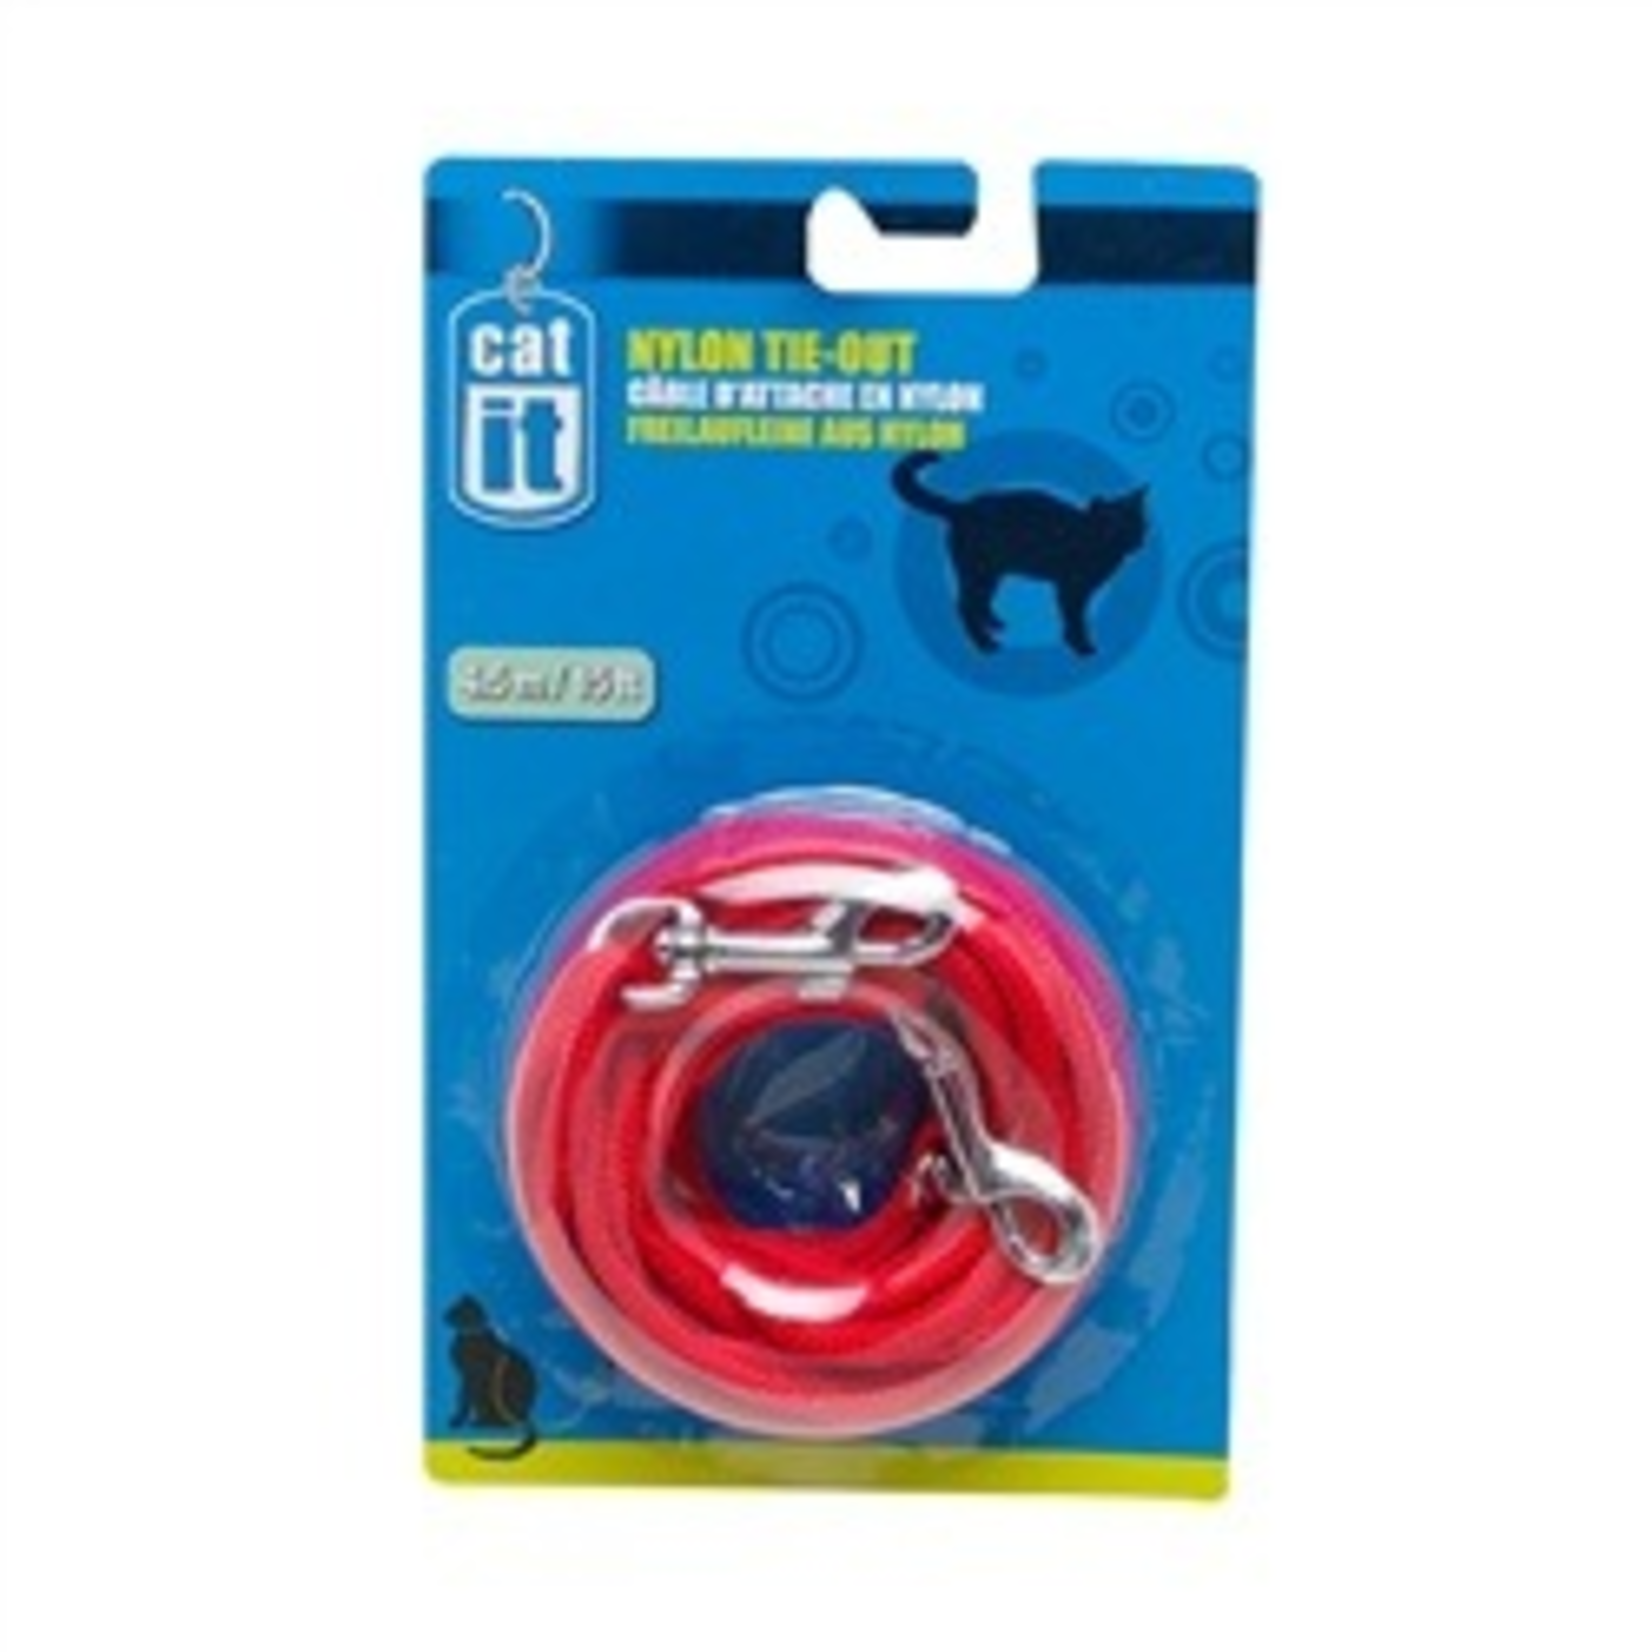 CAT IT (W) CA Nyl. Tie-out, 6m (20 ft),Red-V